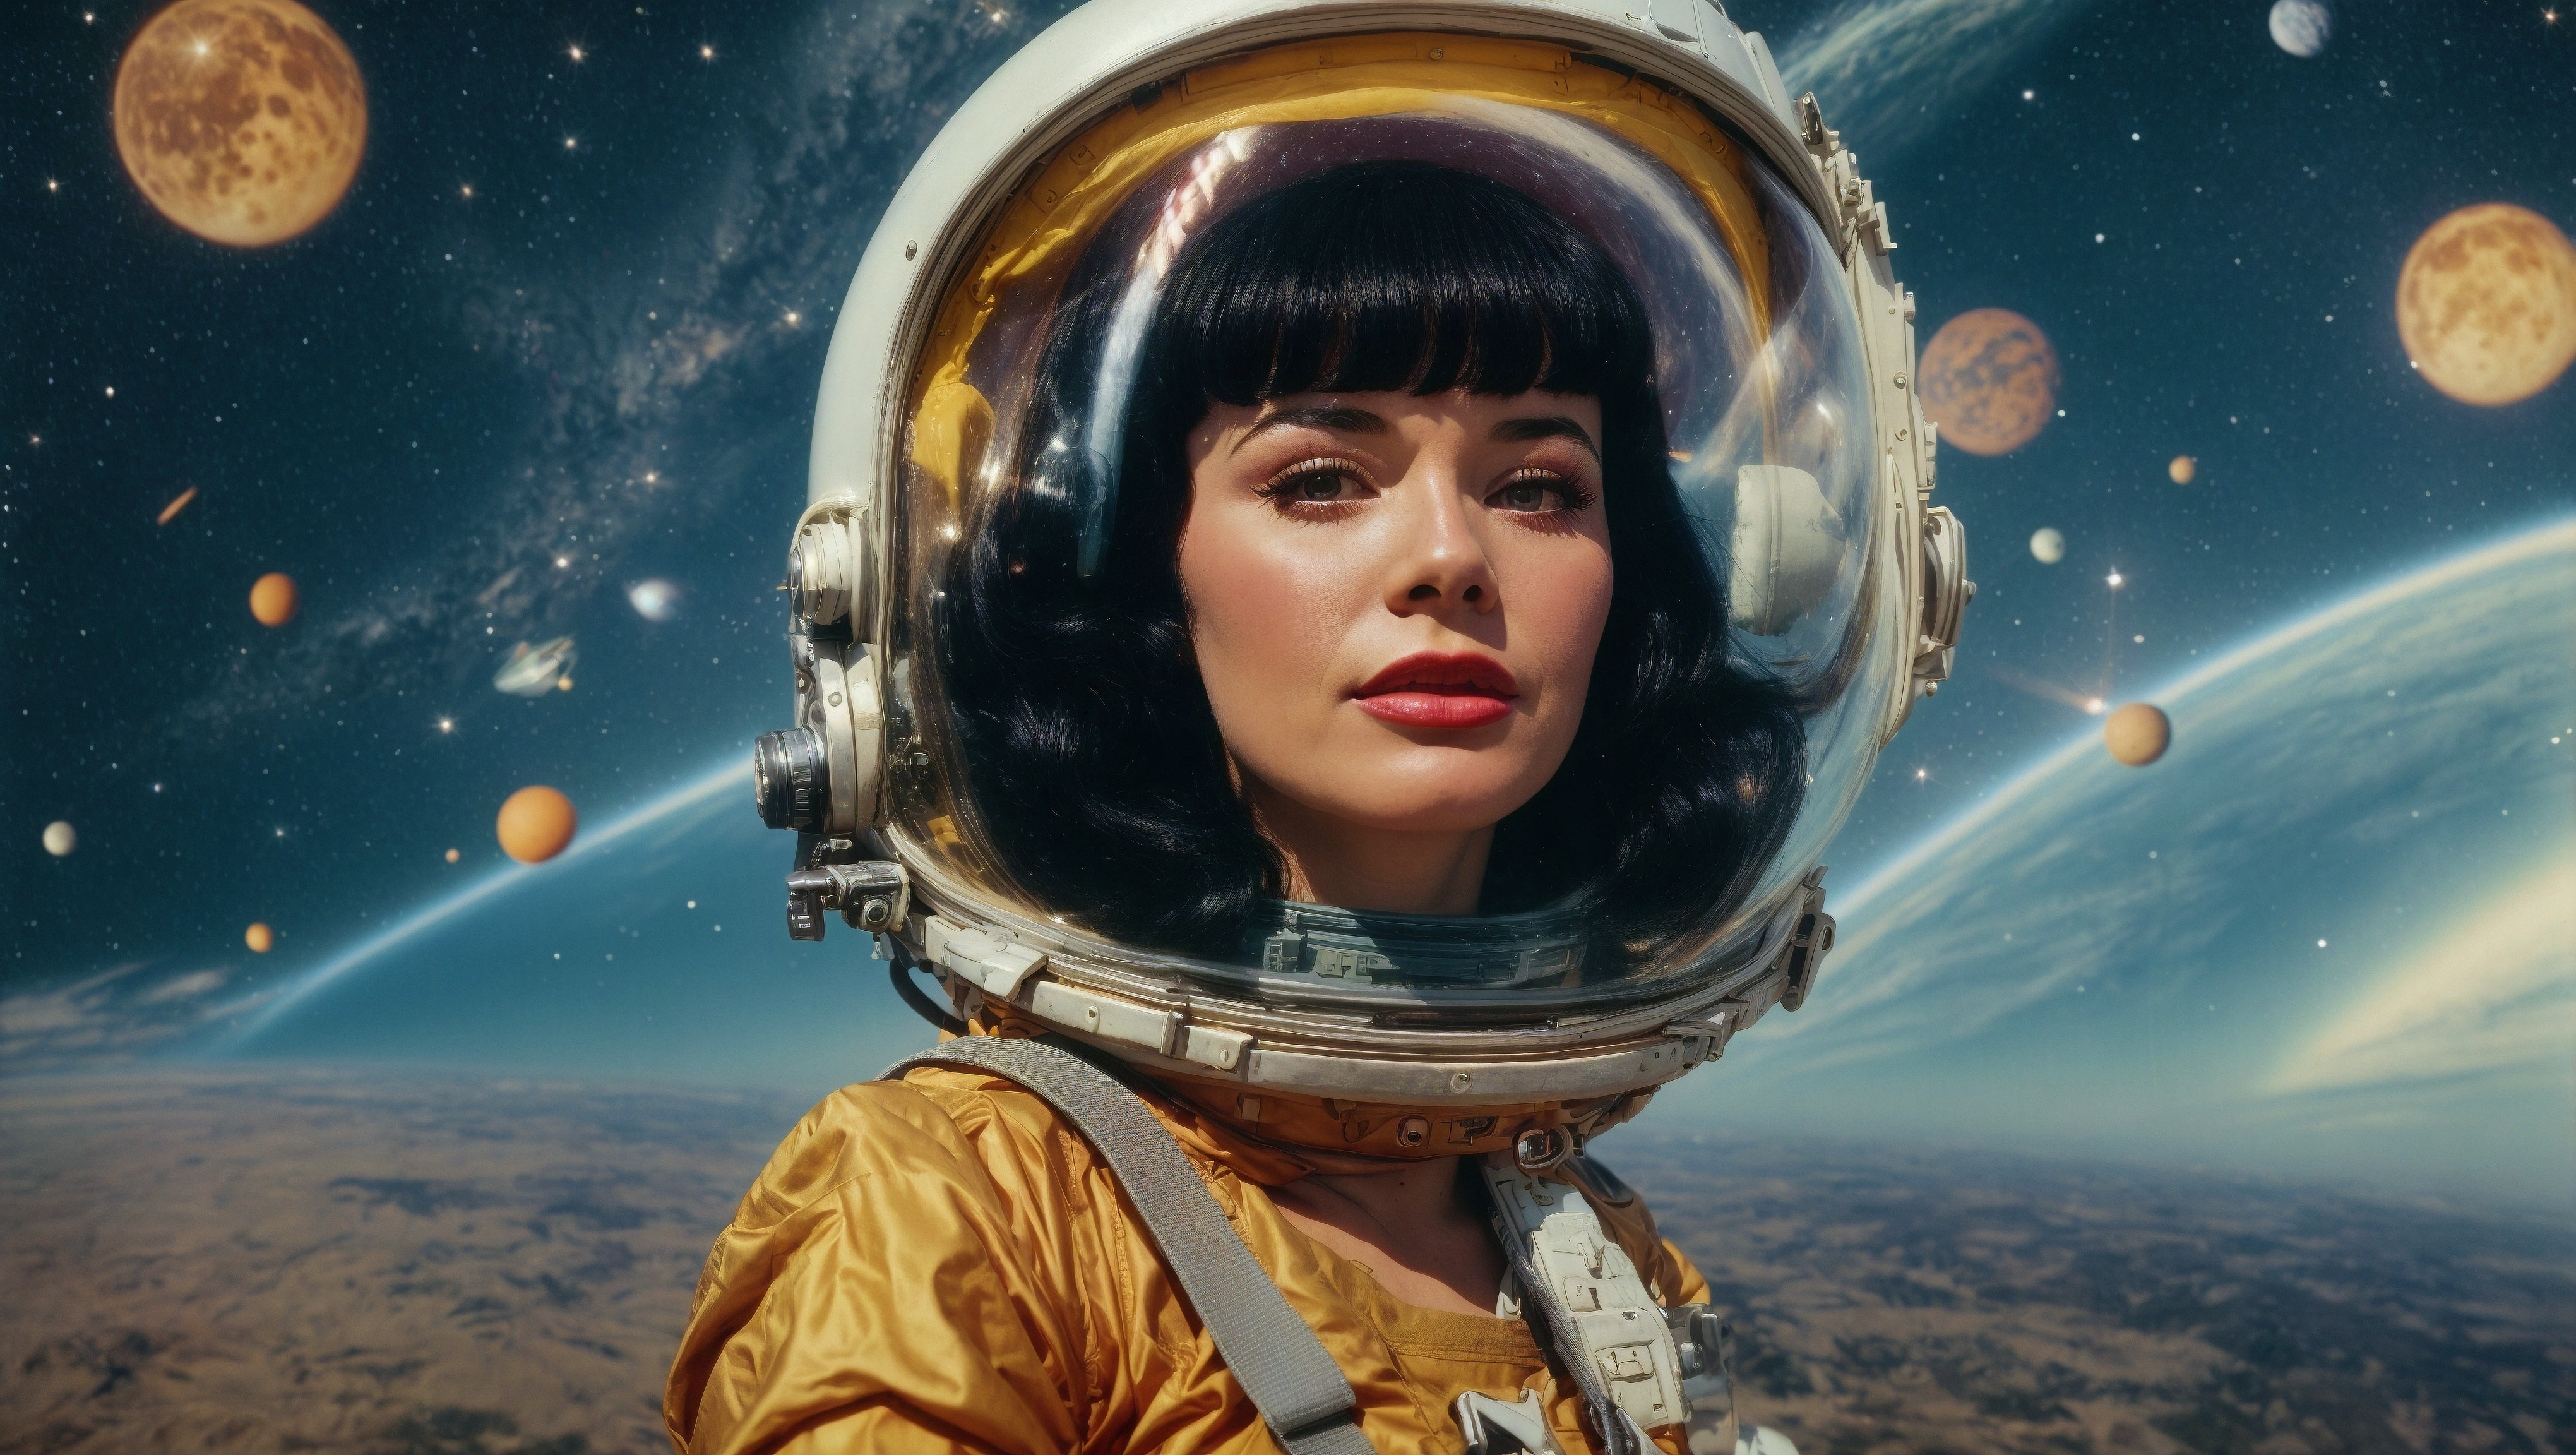 A woman in an astronaut`s outfit staring out at the planets